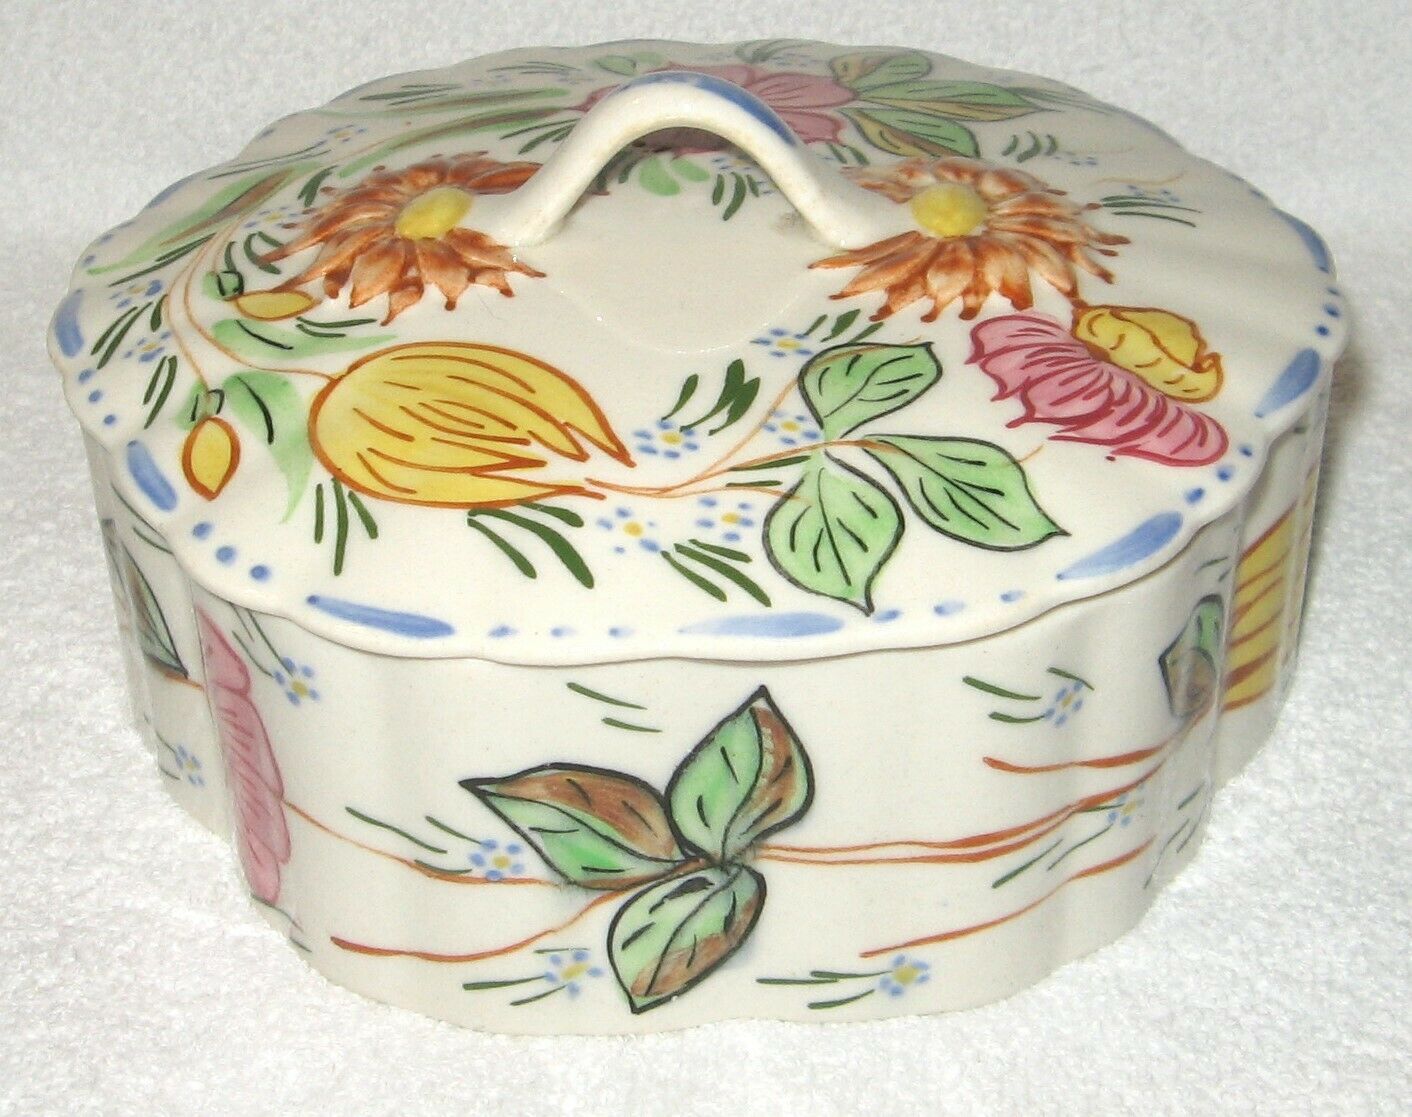 Southern Pottery Blue Ridge "rose Marie" Candy Box Excellent Condition!